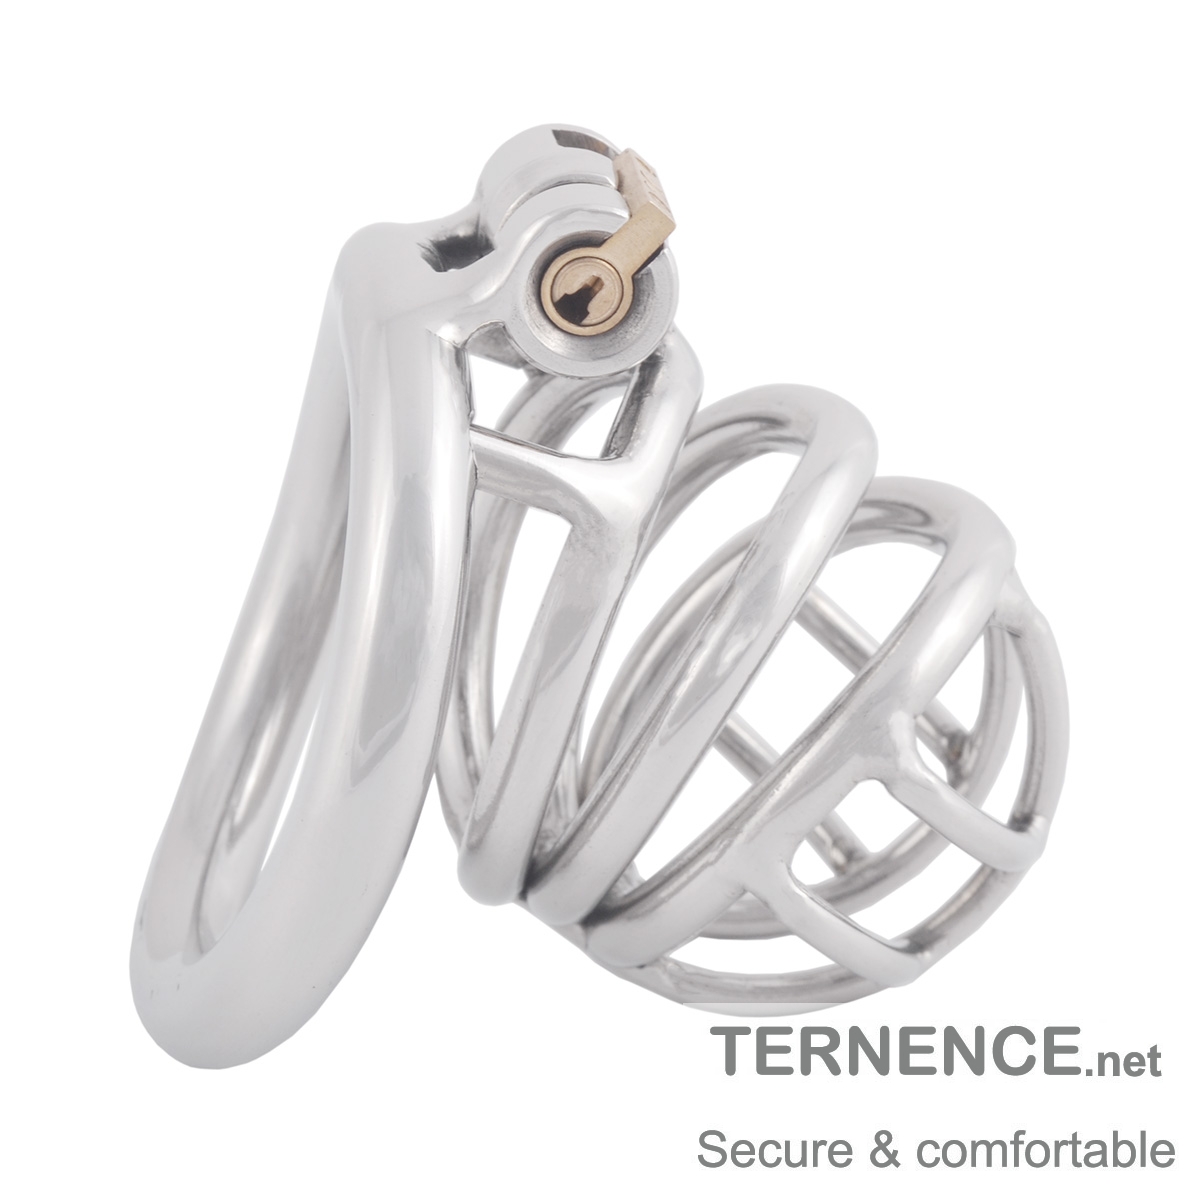 TERNENCE Stainless Chastity Device Male Ergonomic Design Long Cock Cage  K850 (50mm L Size)